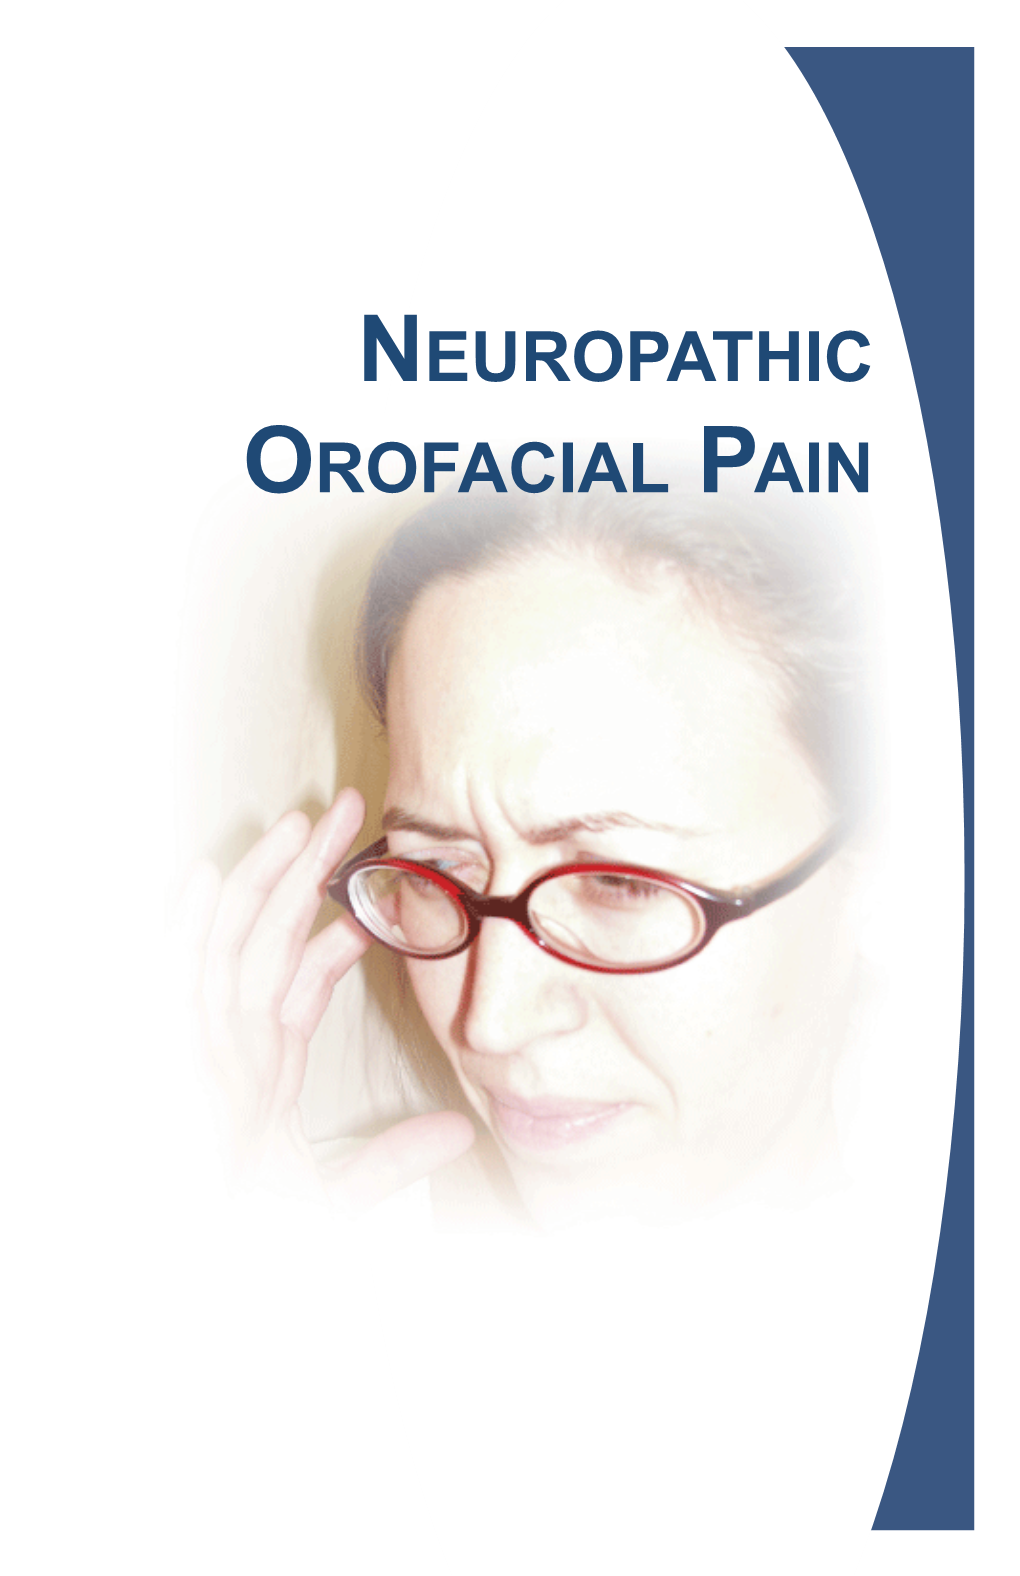 Neuropathic Orofacial Pain the Brochure Is Provided Compliments Of